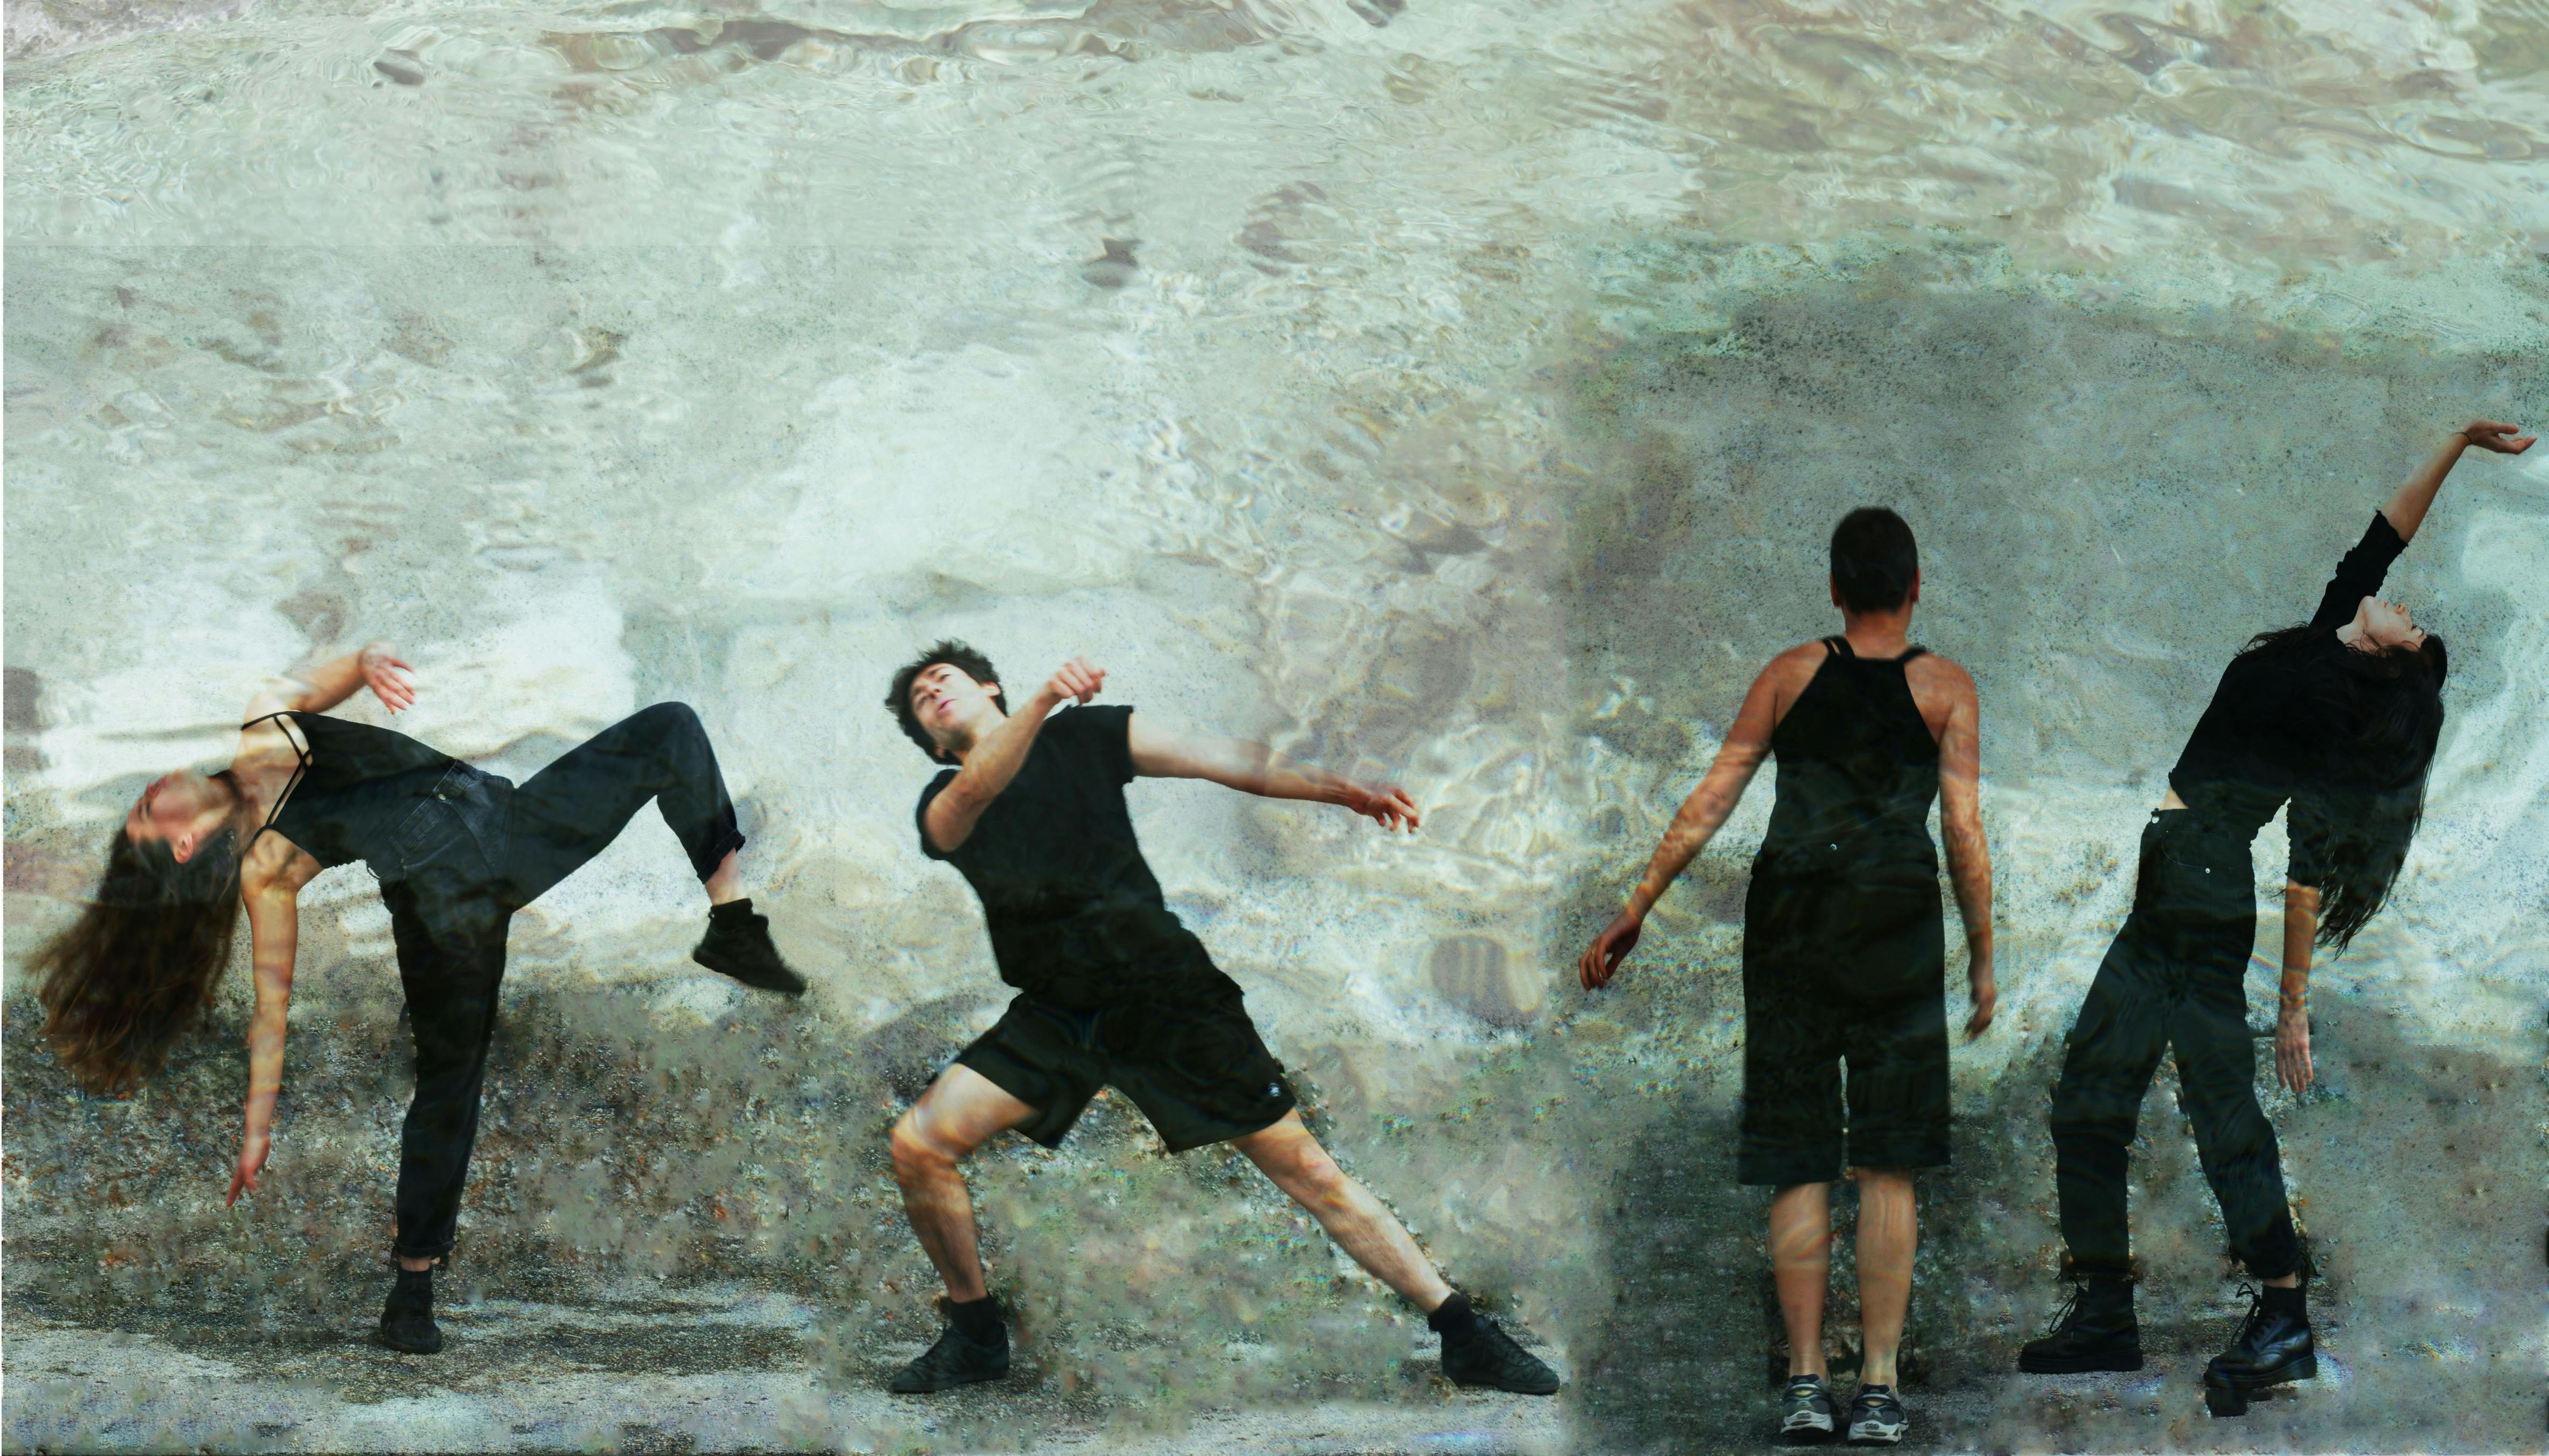 Four dancers moving - from right to left: two in a frontal position, one from the back and one from the side - with a background imitating the reflection of water